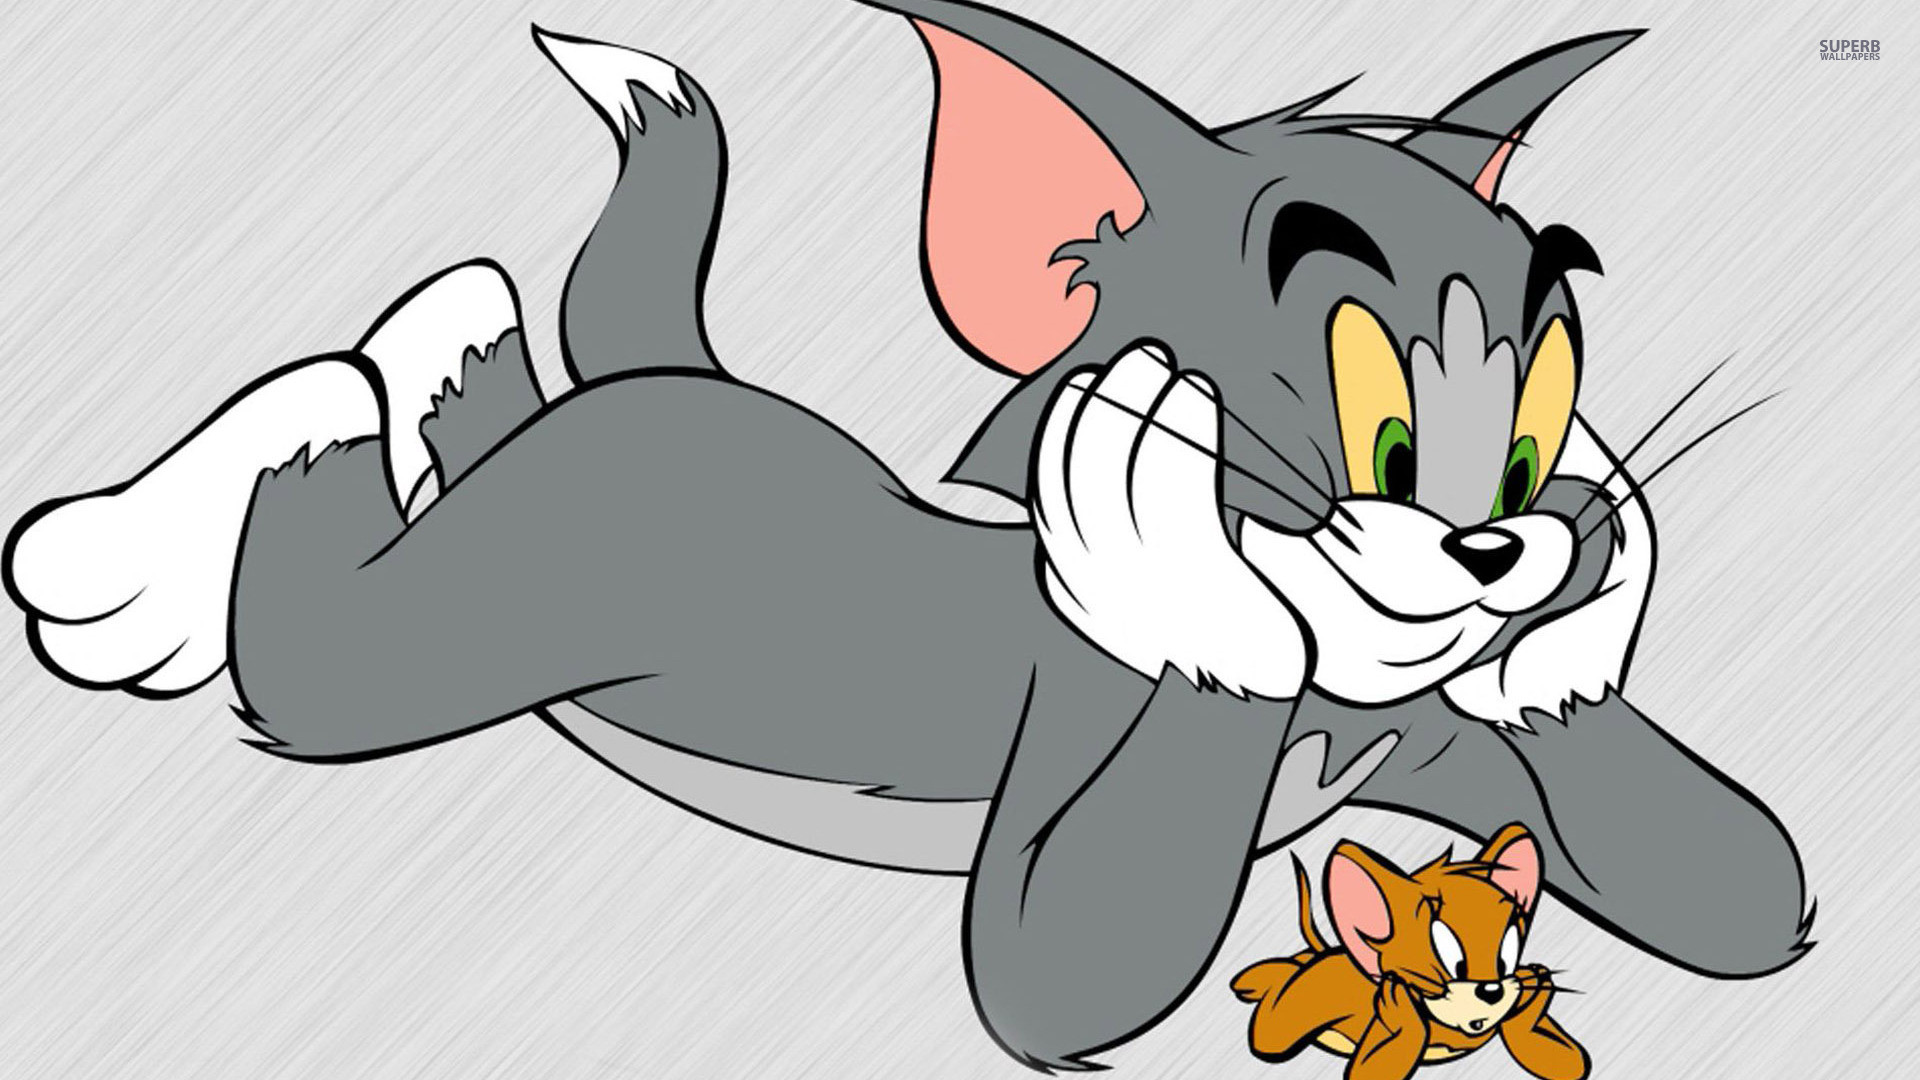 Tom and Jerry wallpaper - Cartoon wallpapers - #27665